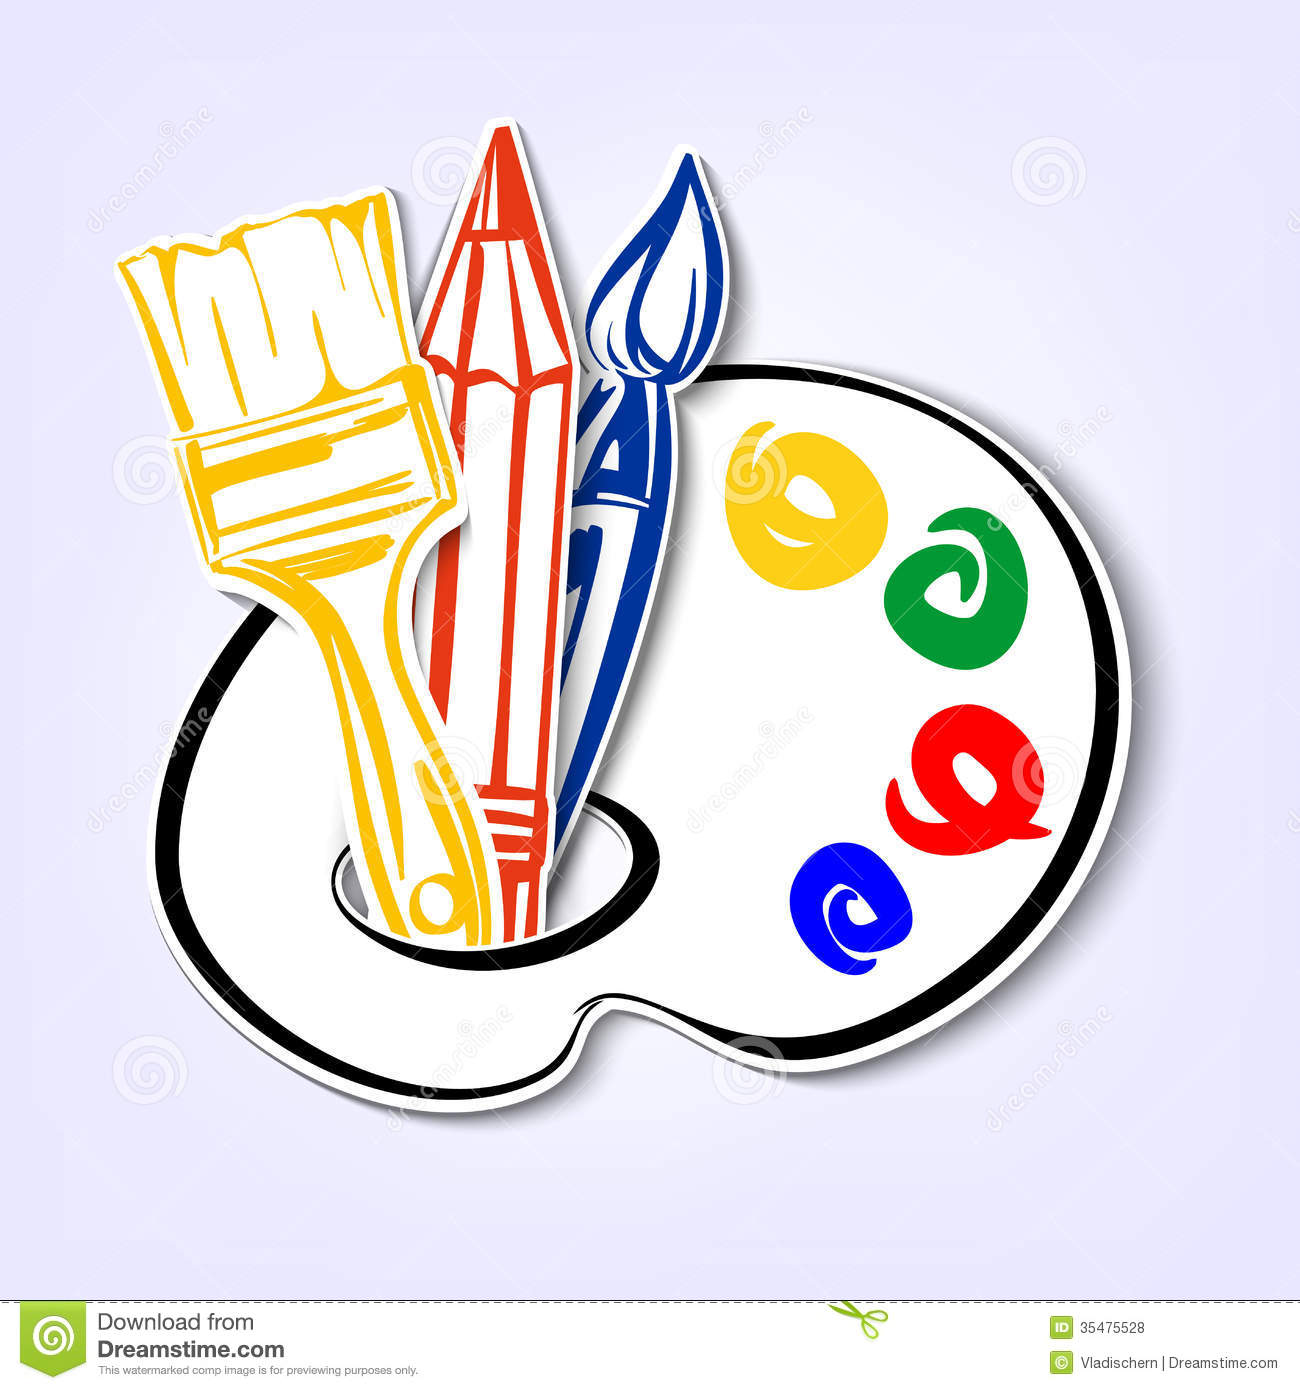 Category Clipart PNG Images, Vector Icon Category, Category Icons